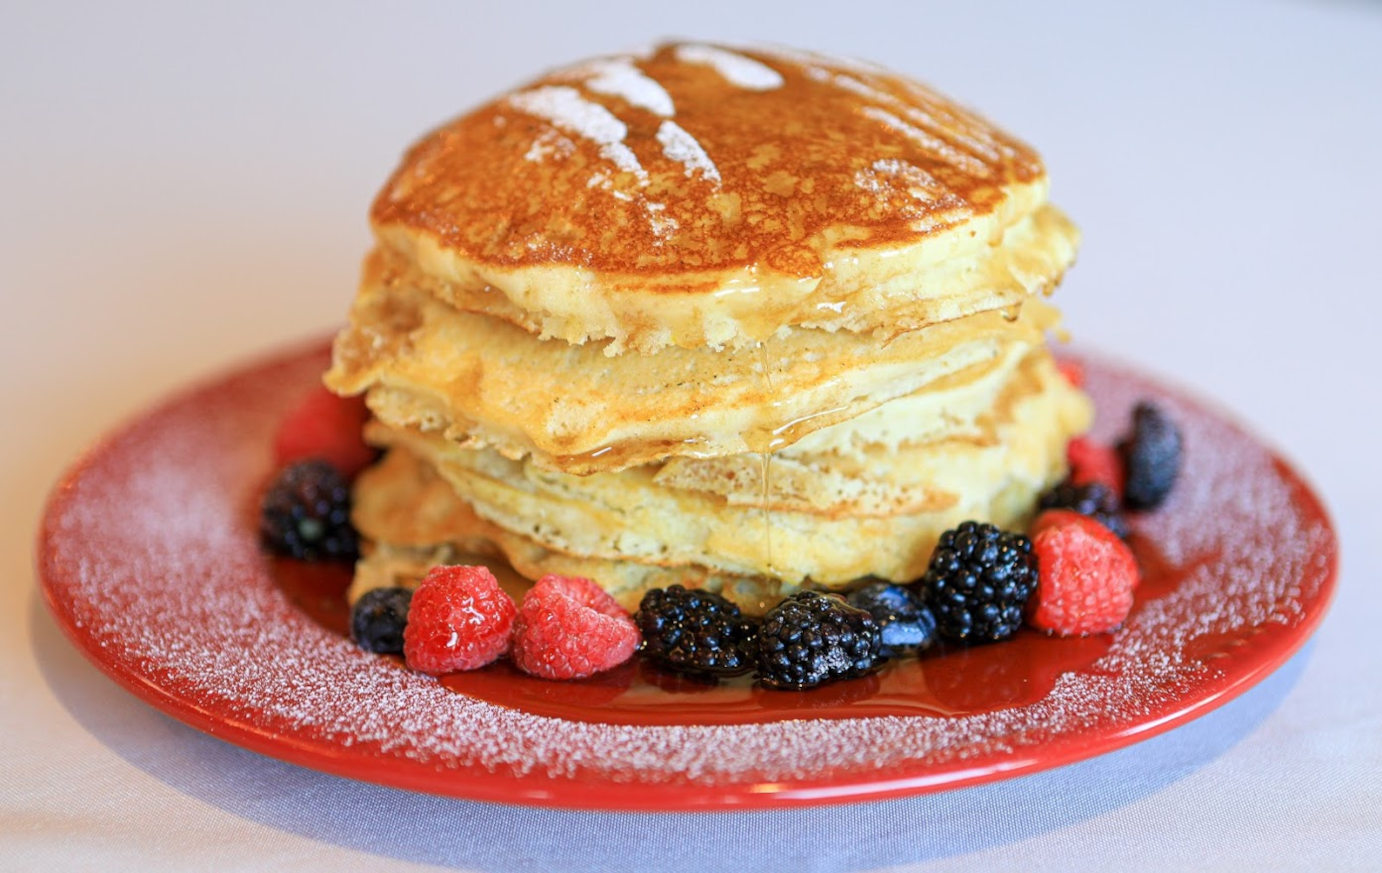 Buttermilk pancake with berries